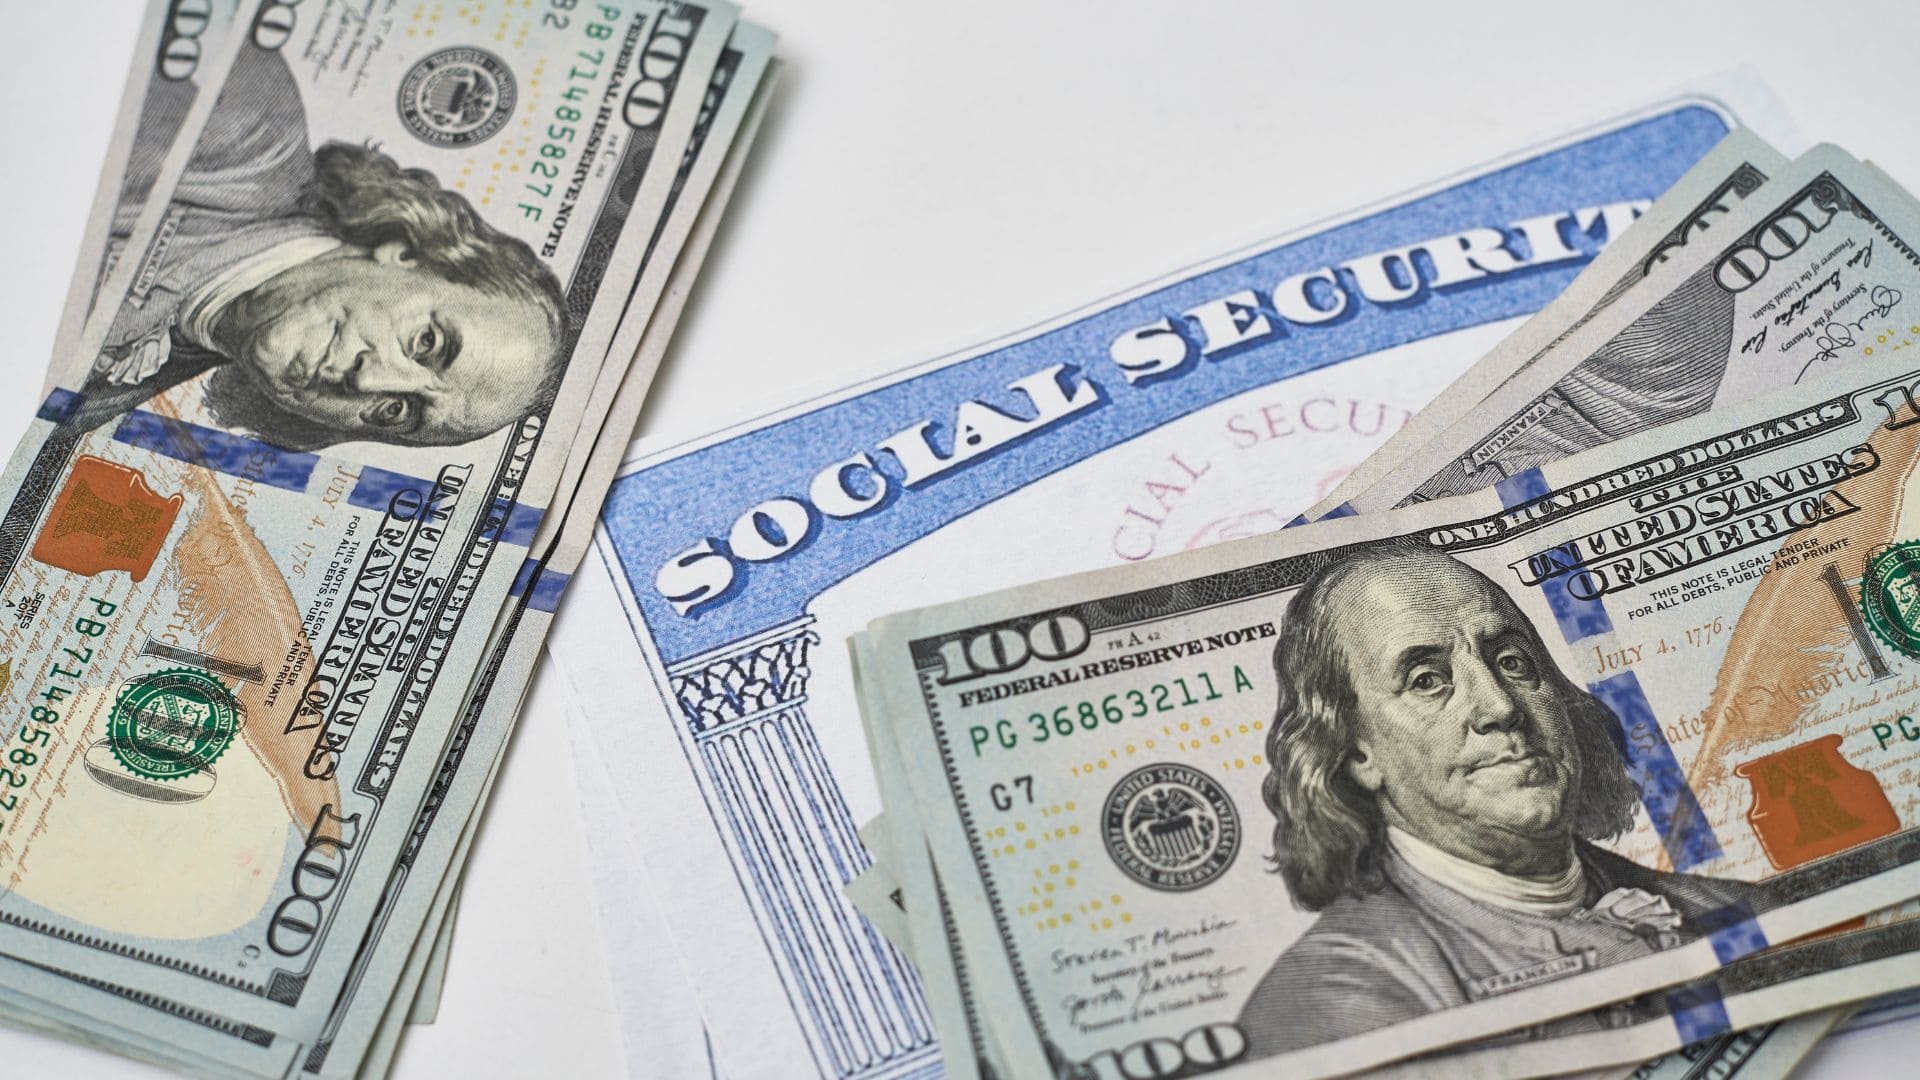 If you want to have the new Social Security payment you have to meet these requirements